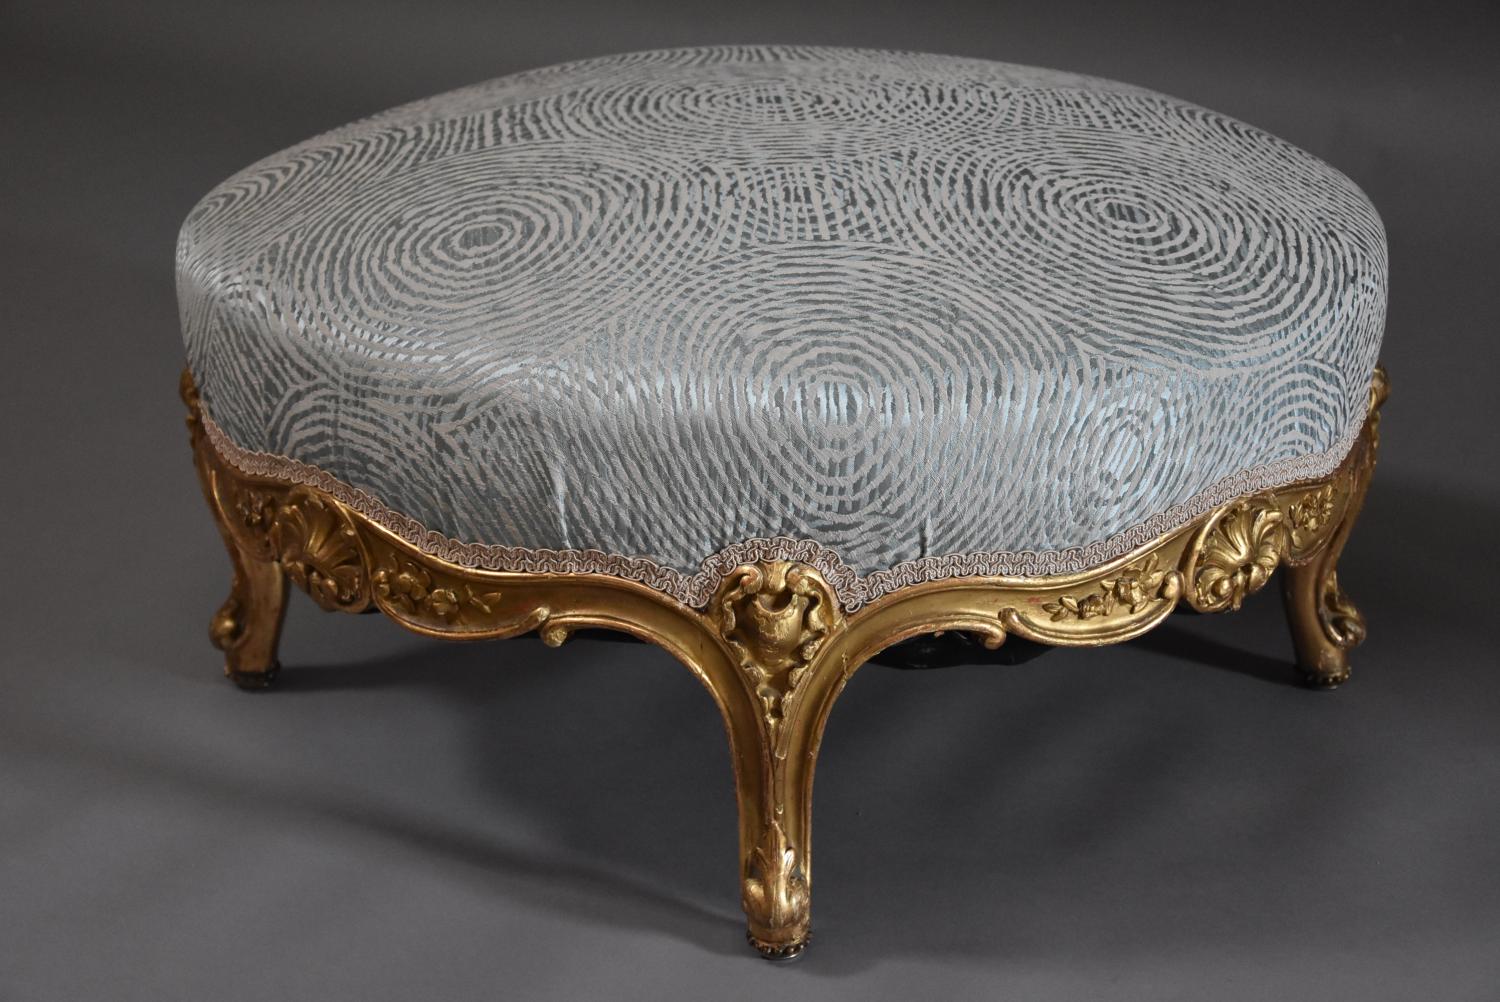 Large 19th century French giltwood footstool